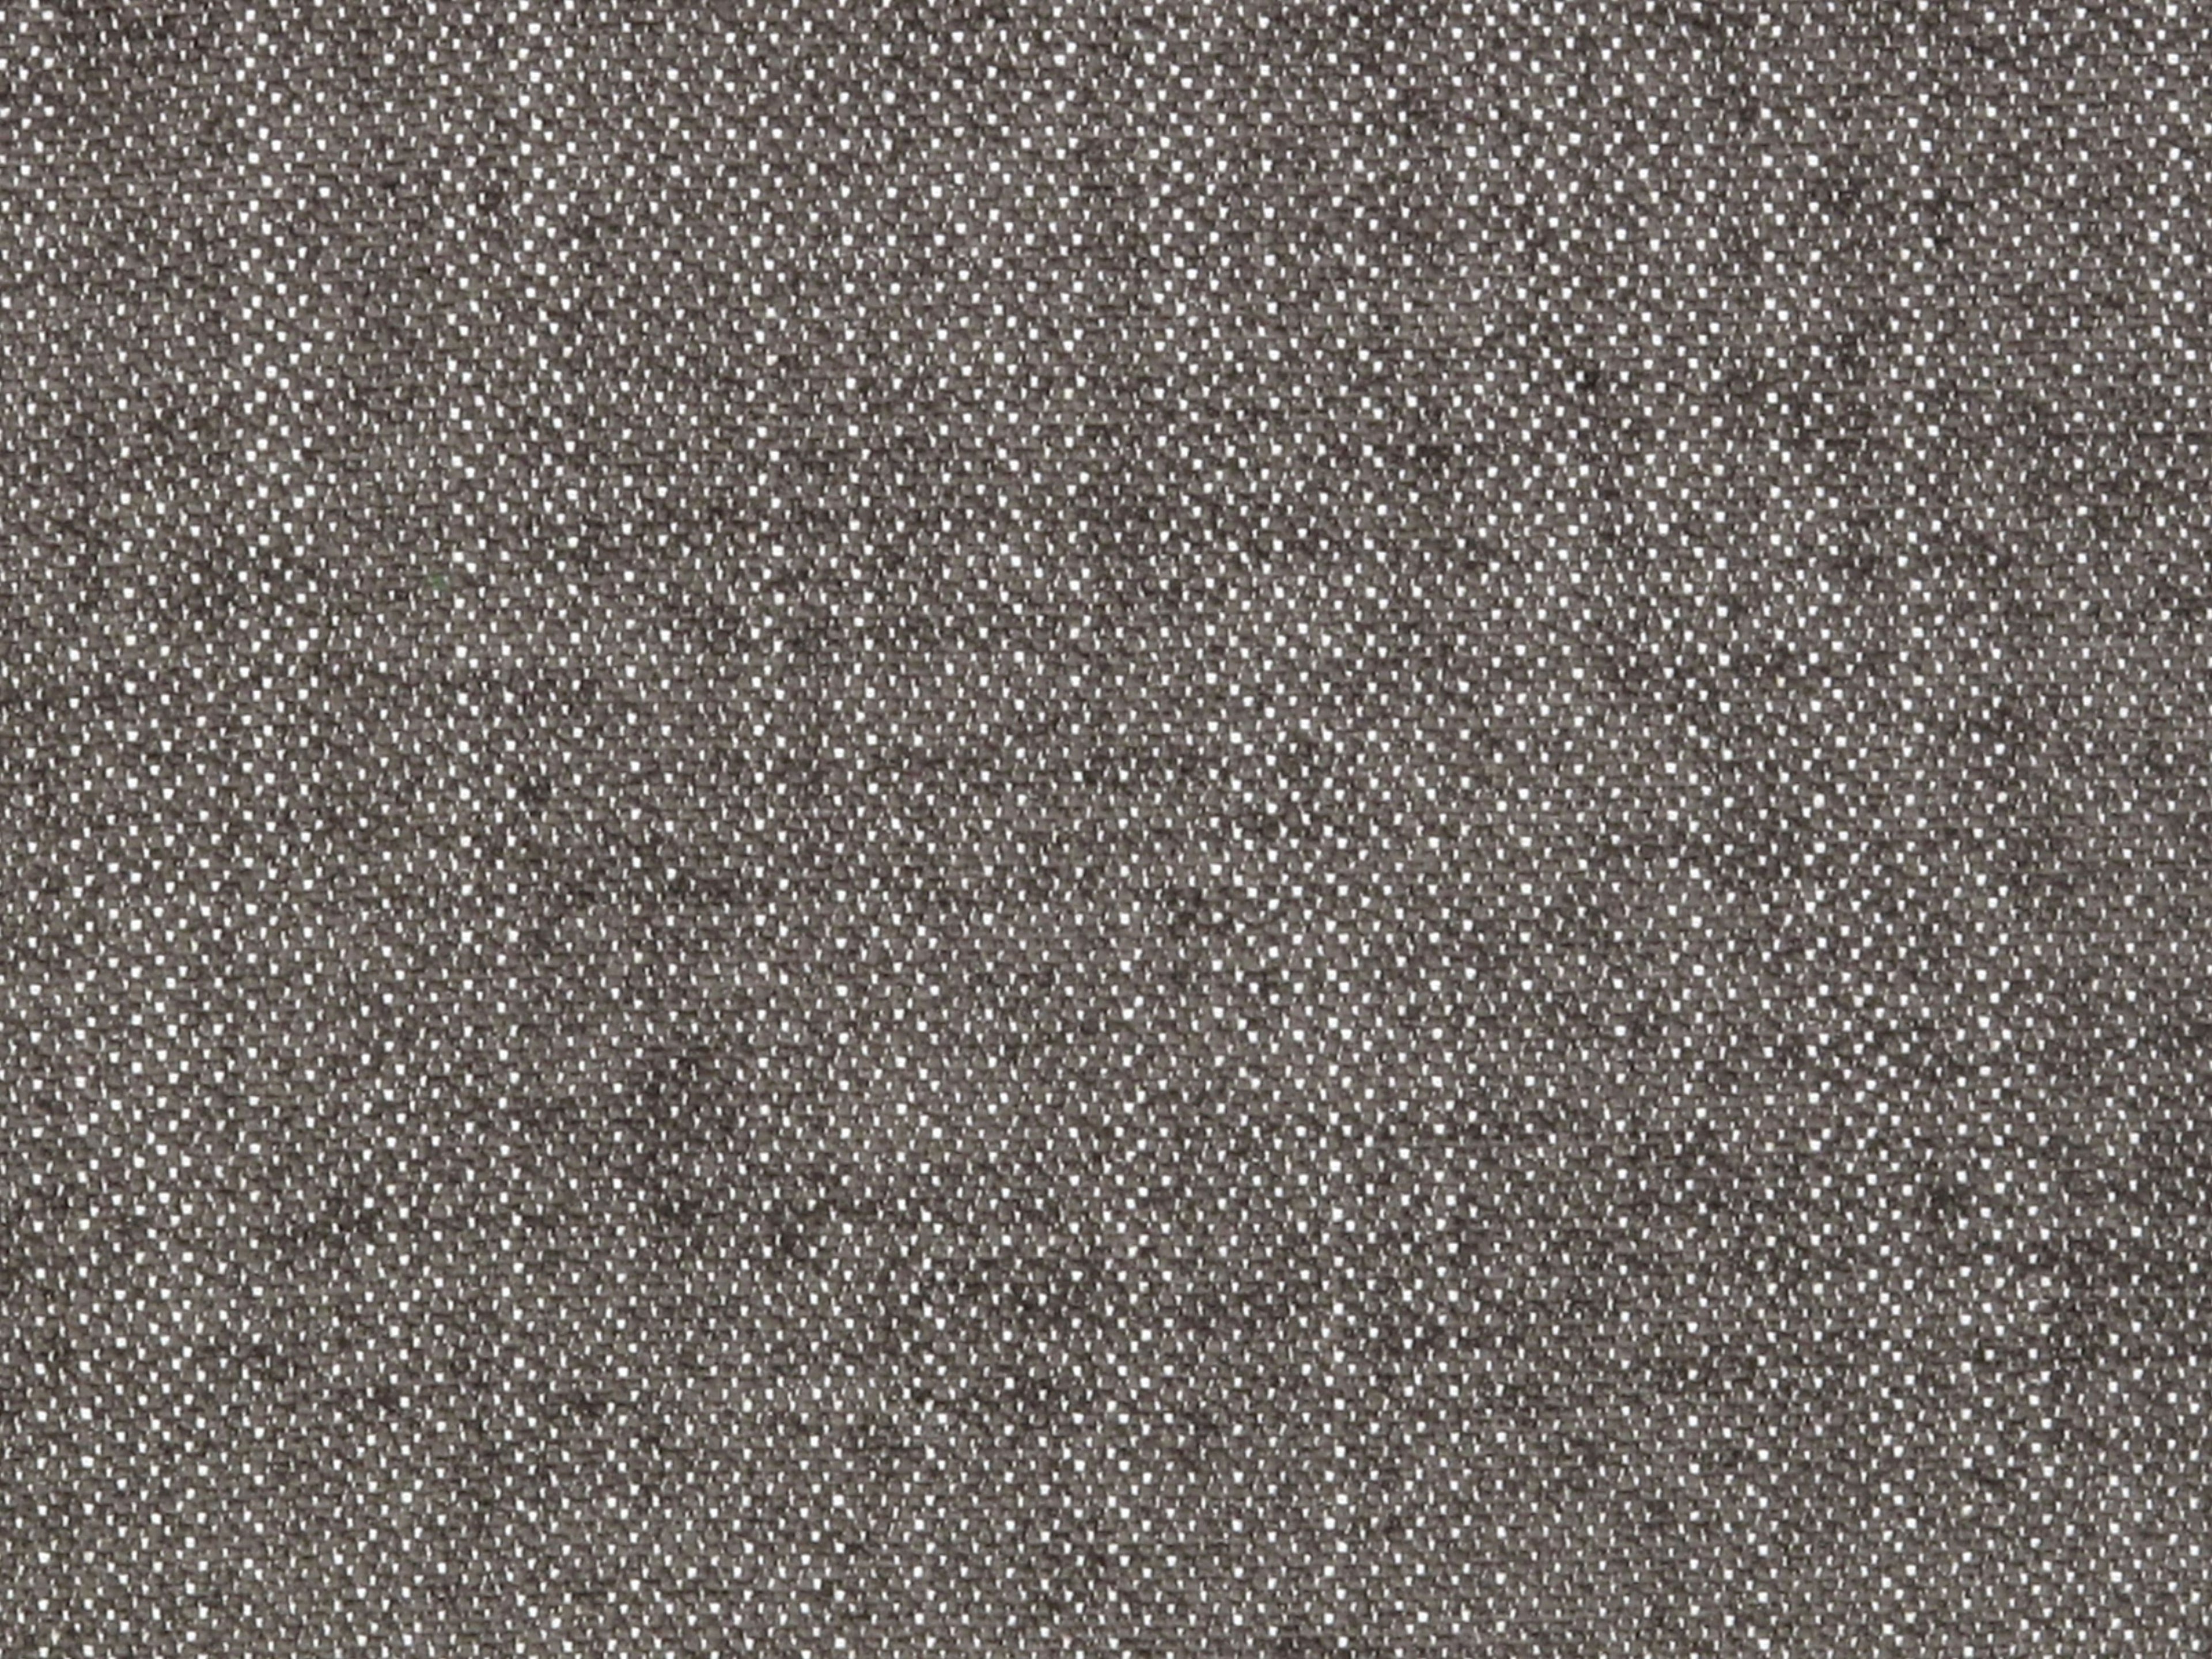 San Miguel Texture fabric in caviar color - pattern number LU 00038257 - by Scalamandre in the Old World Weavers collection